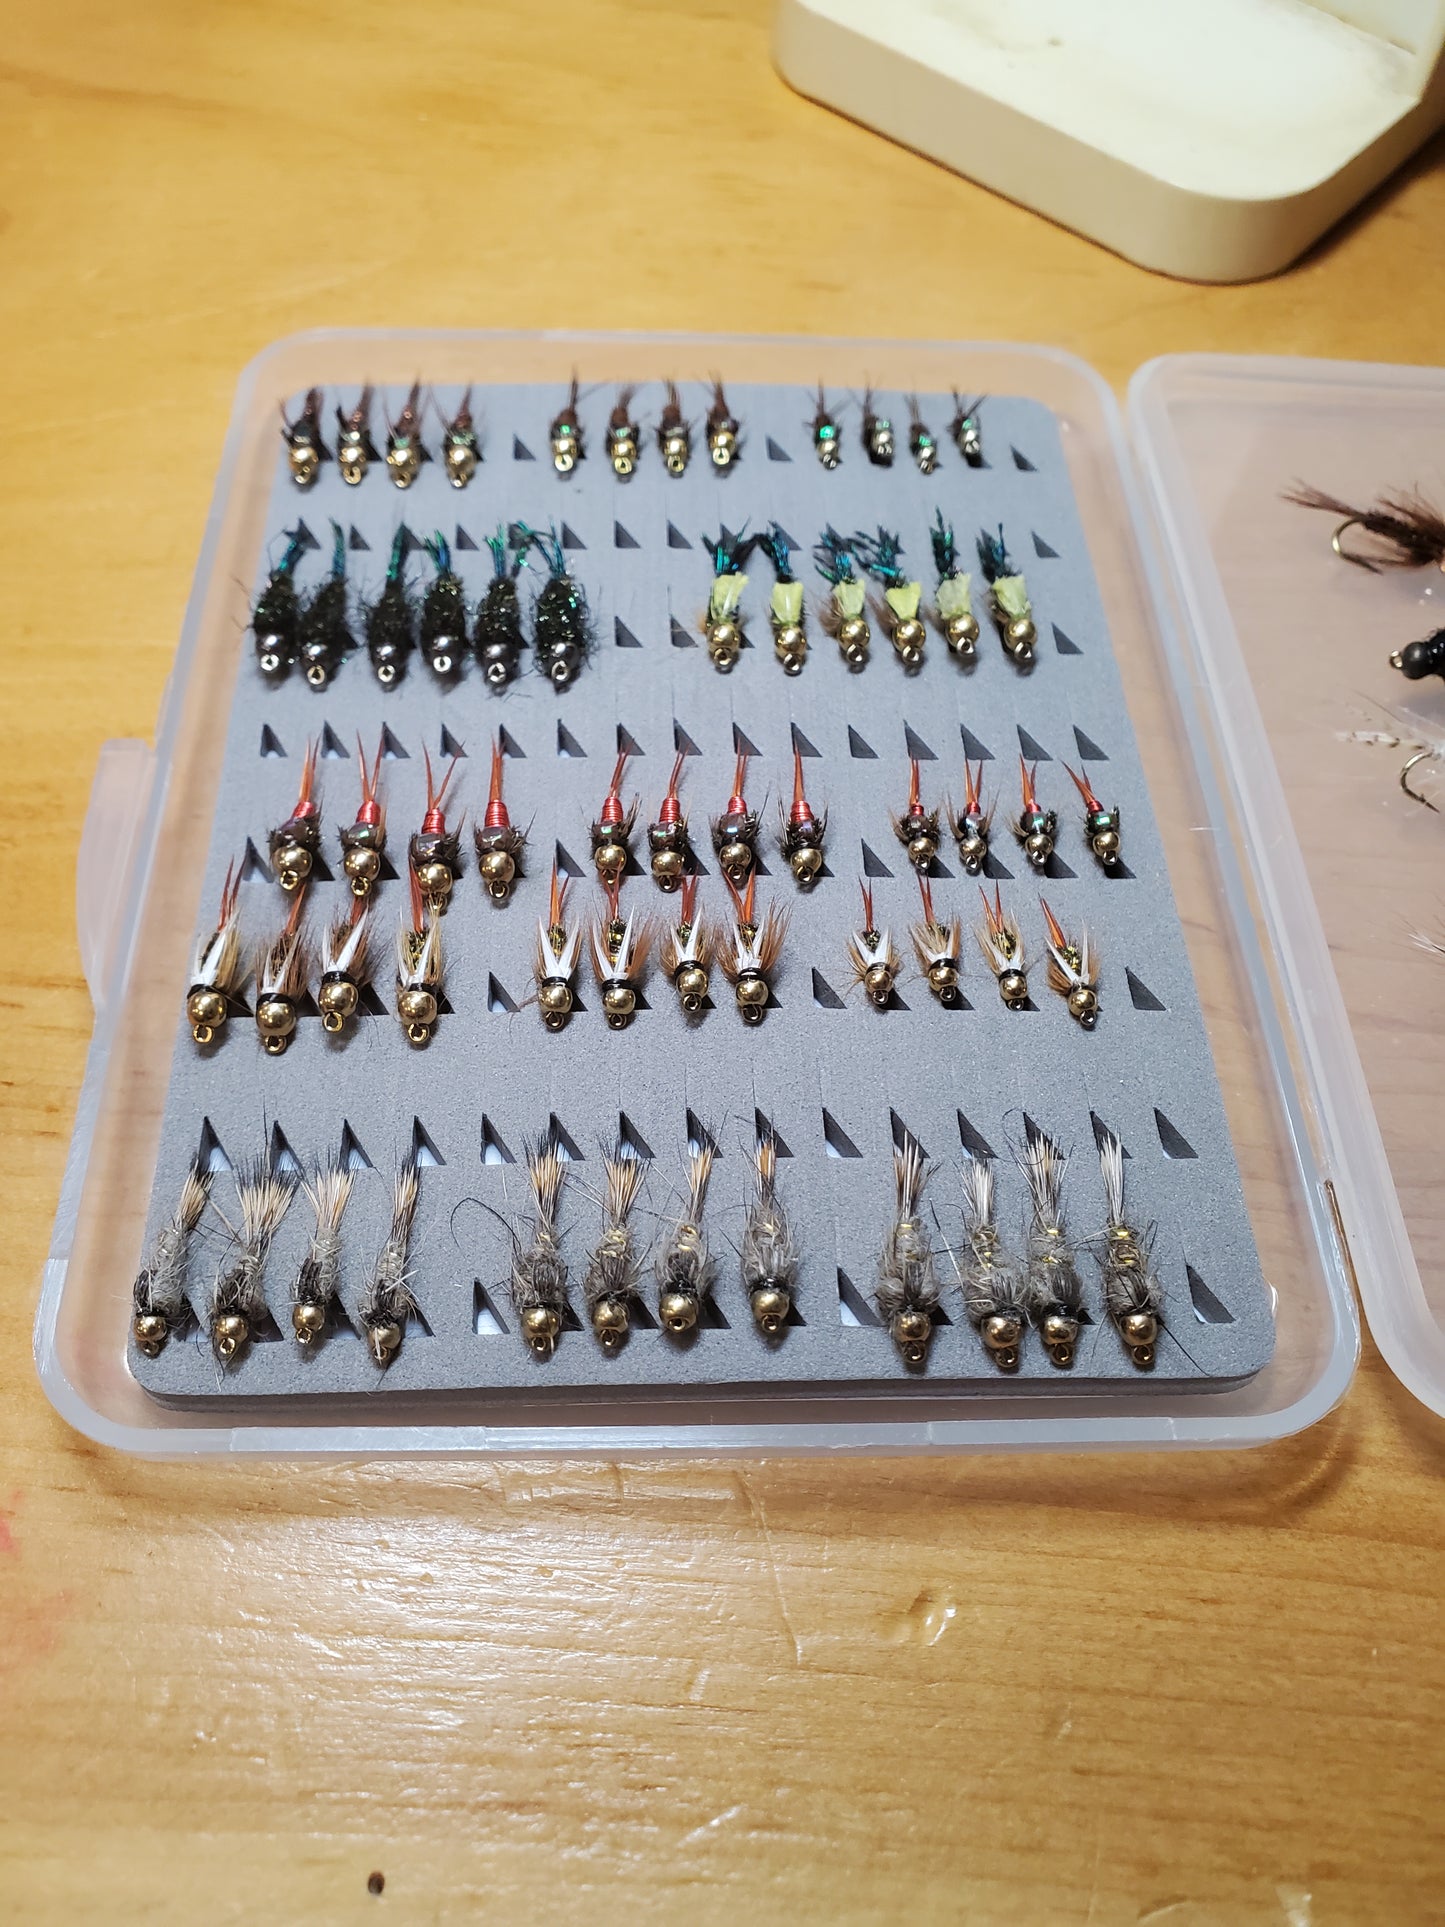 66 Bead Head Nymph Trout Flies in fly Box, Trout Fly Assortment, Nymph Selection